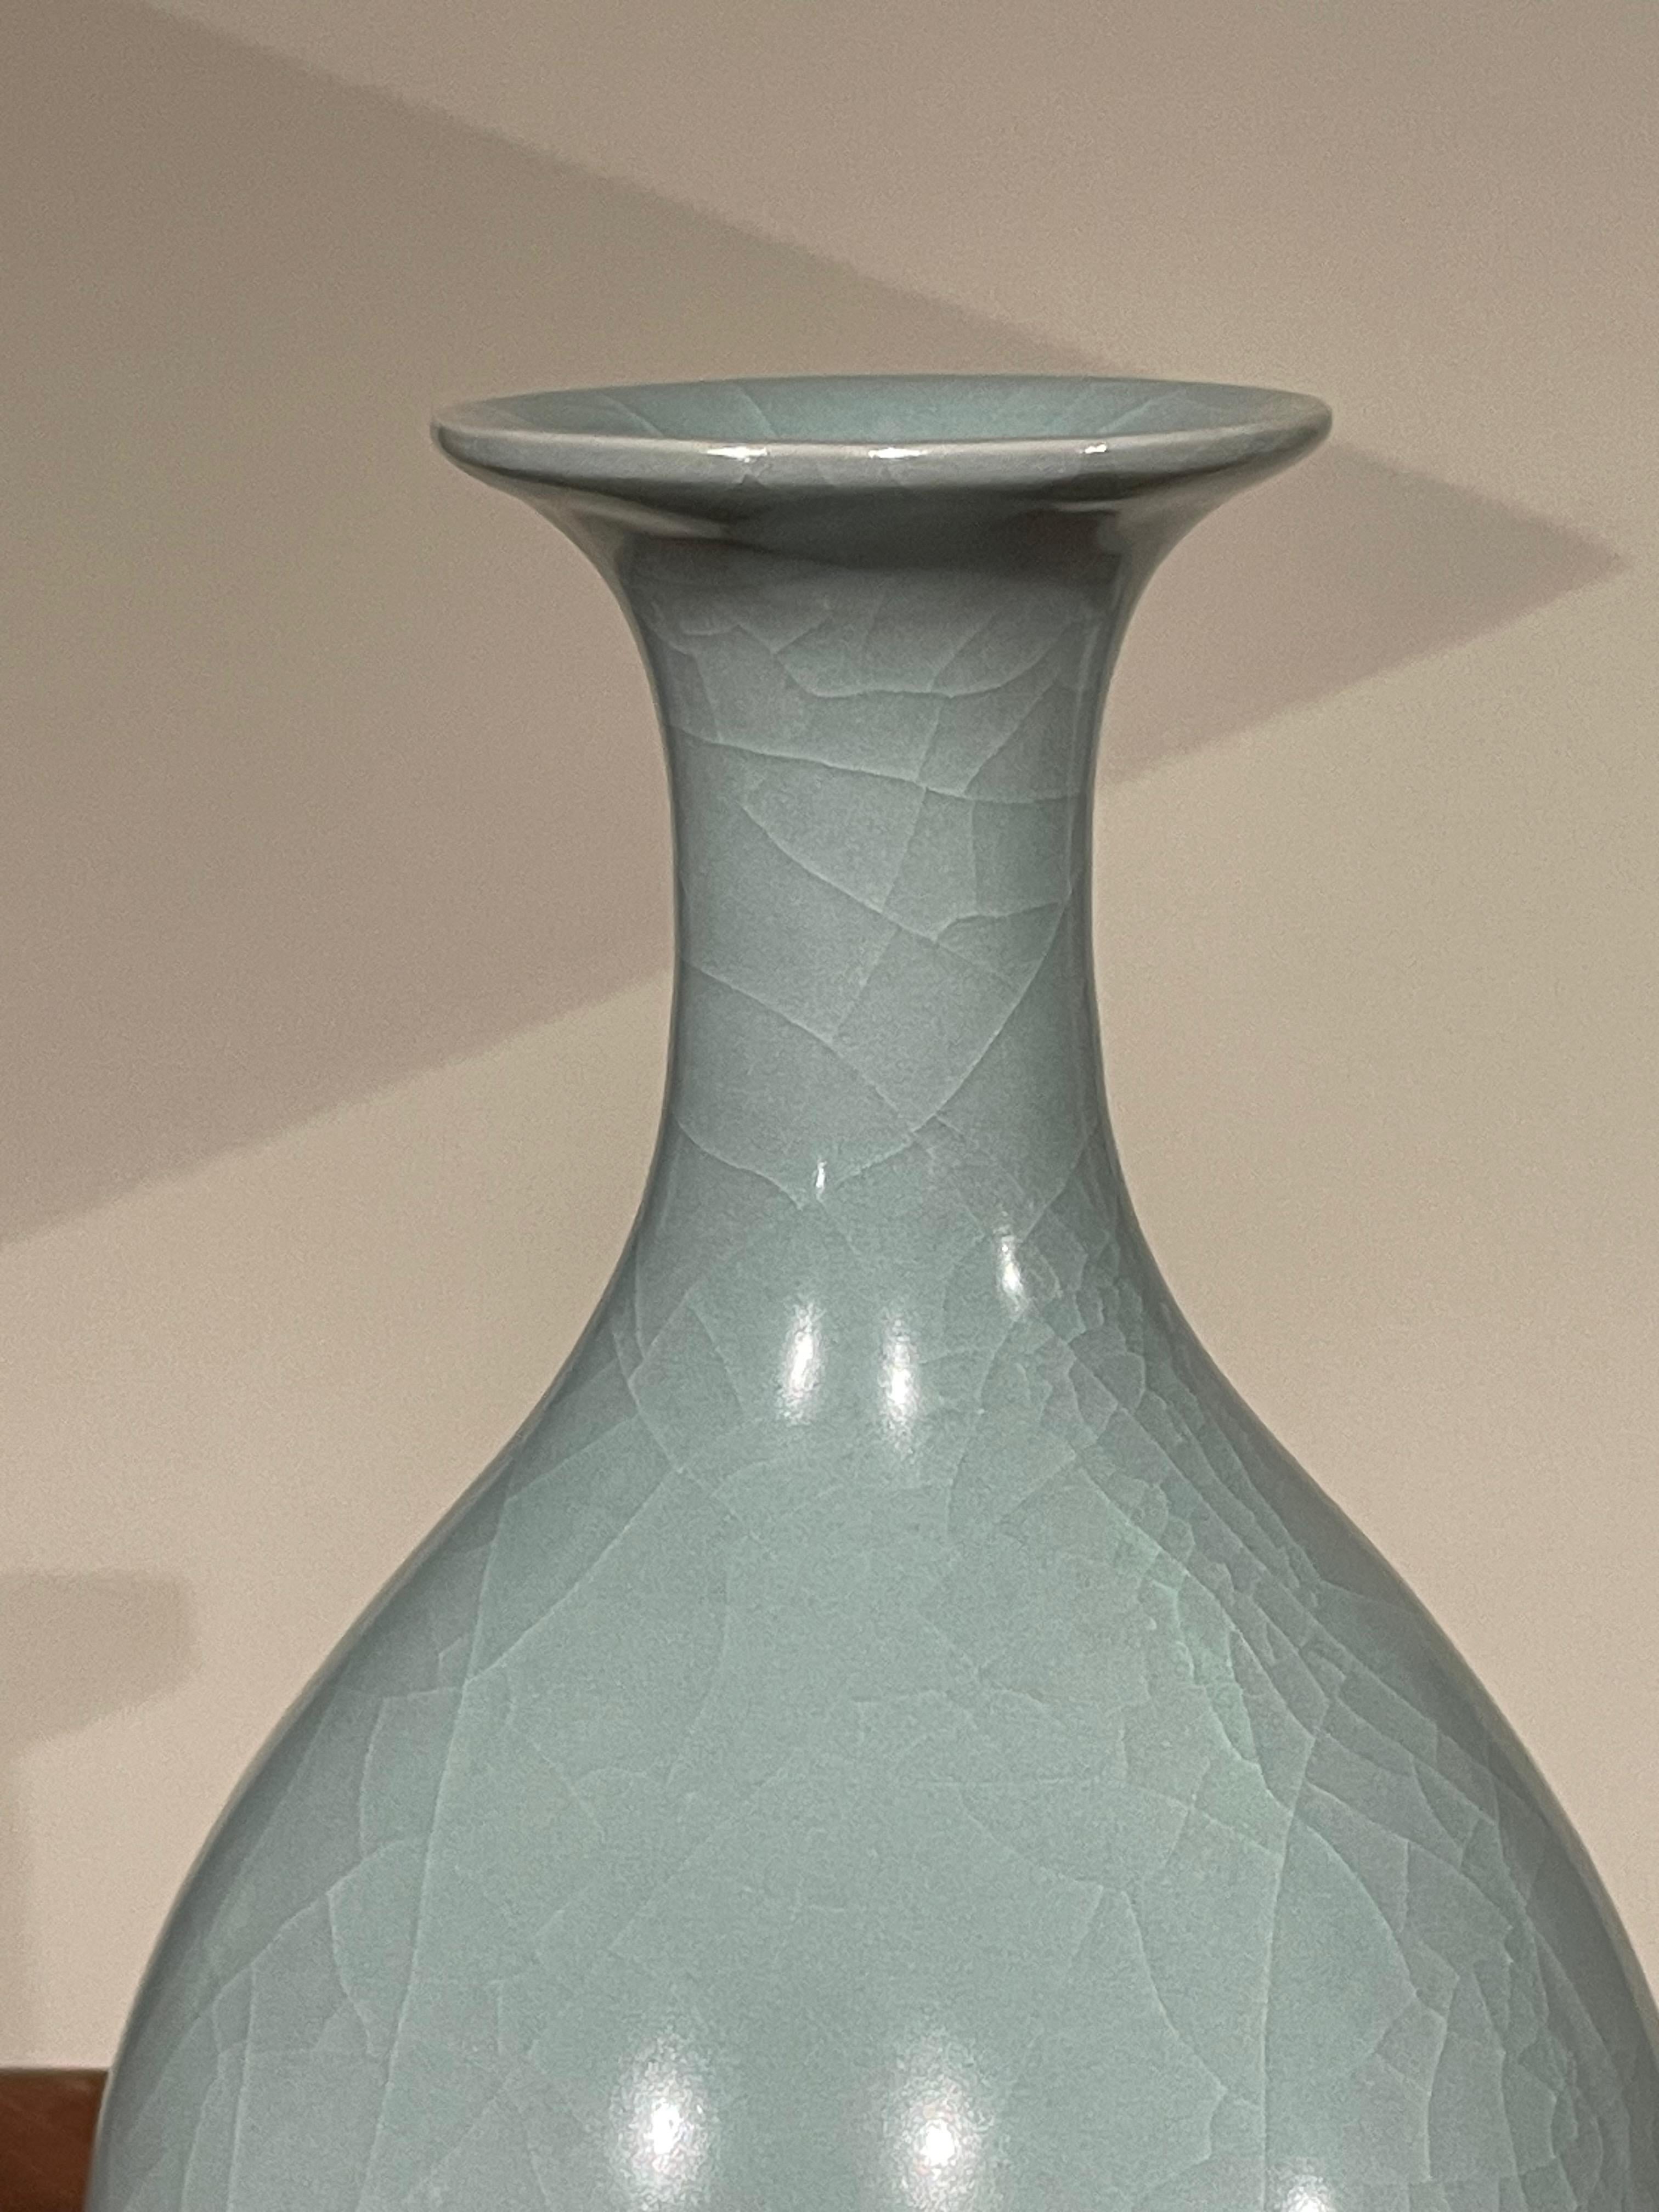 Contemporary Chinese pale turquoise vase.
Classic shape with rounded bottom.
Large collection available with varying sizes and shapes.
Sold individually.
ARRIVING APRIL